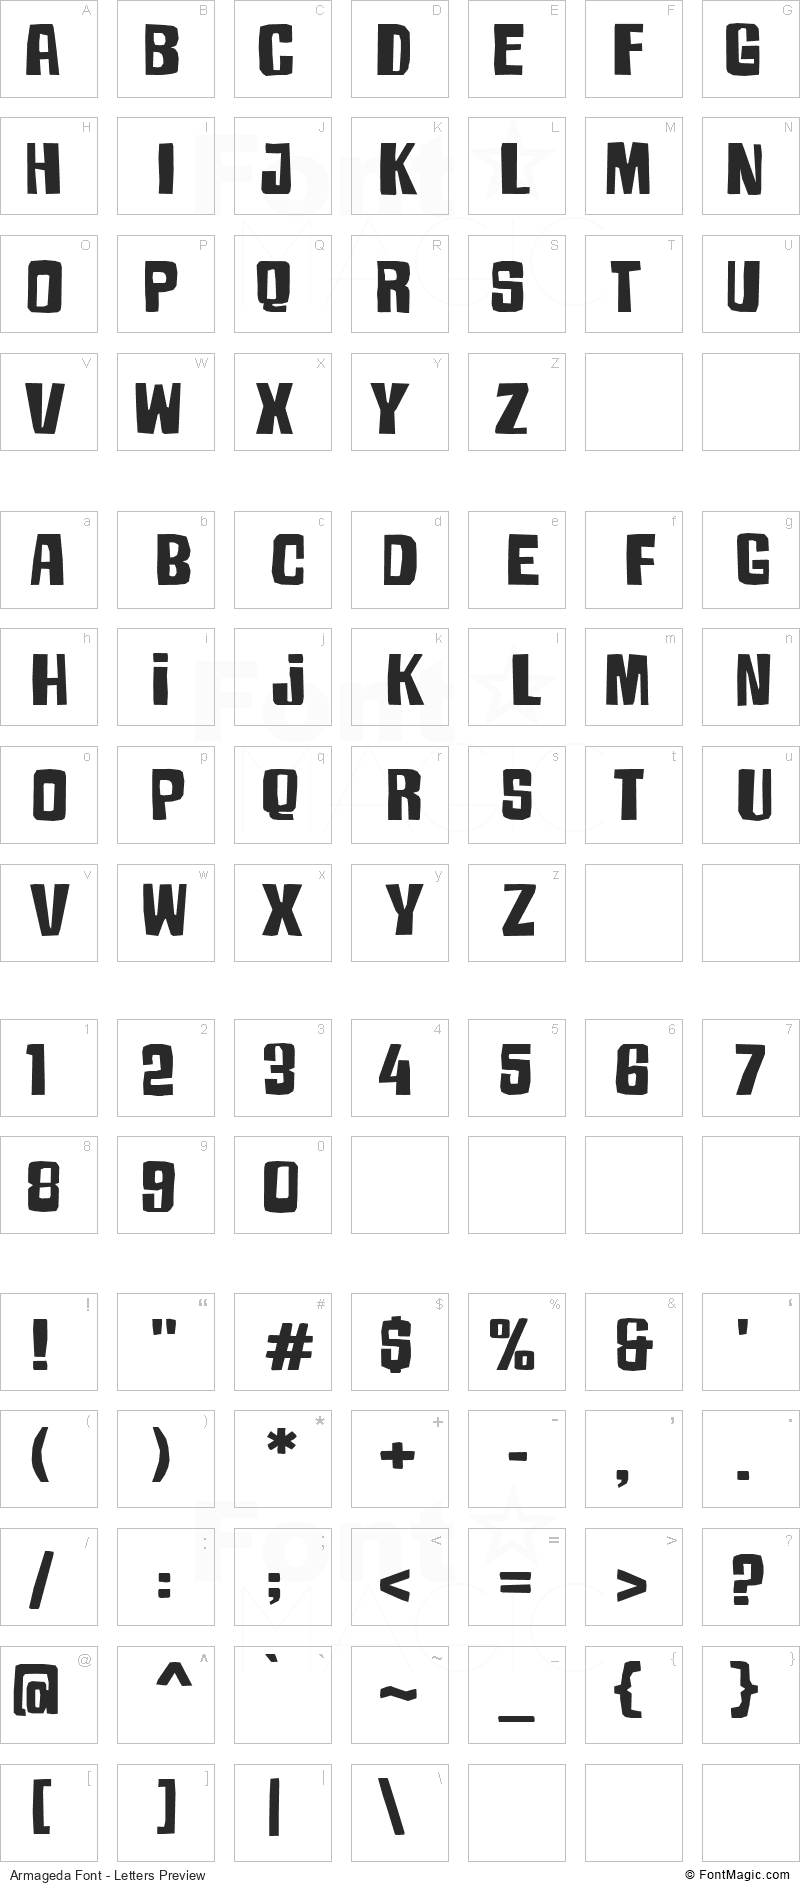 Armageda Font - All Latters Preview Chart